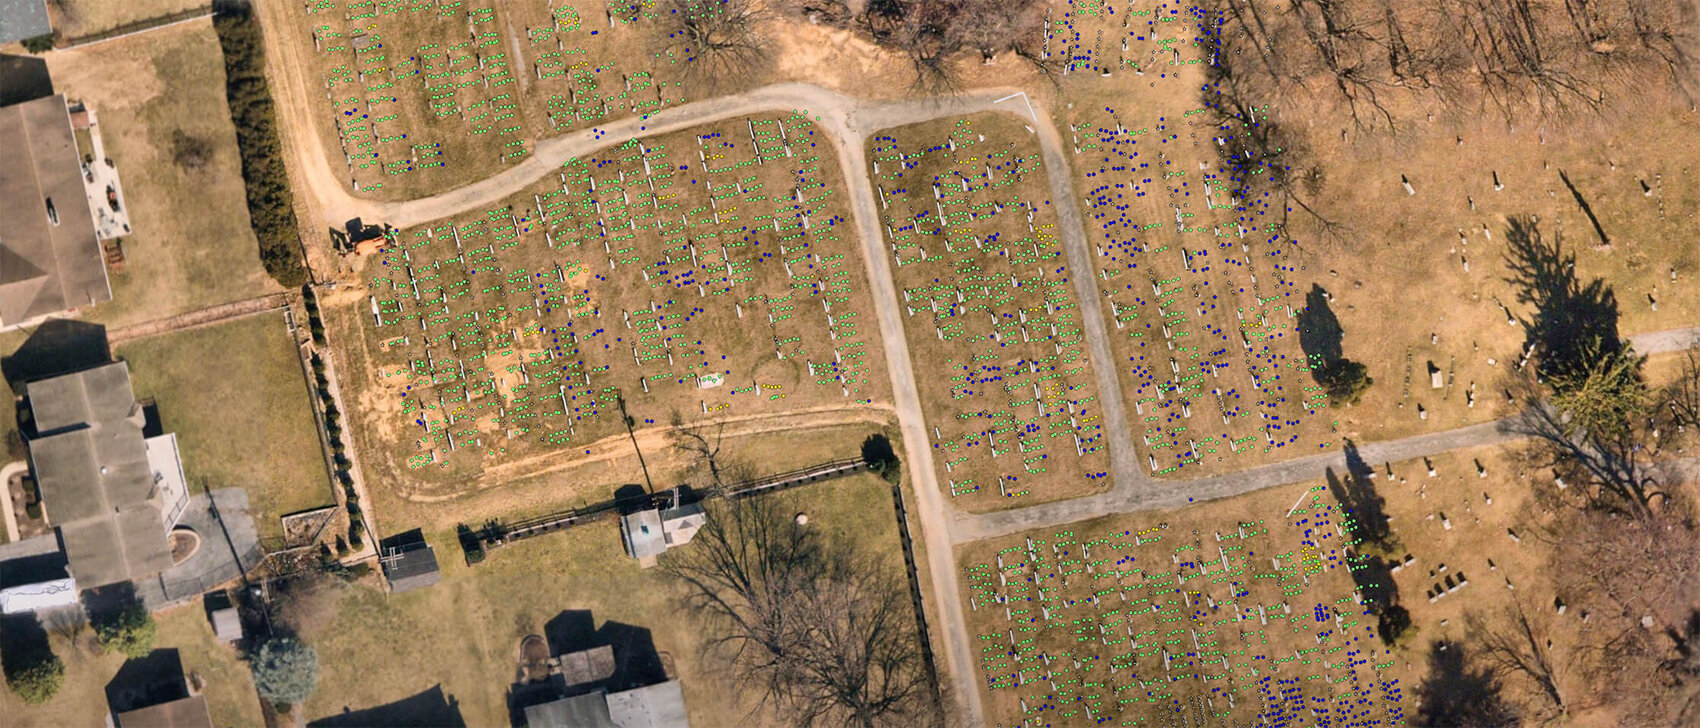 locating unmarked burial sites at The Lebanon Cemetery